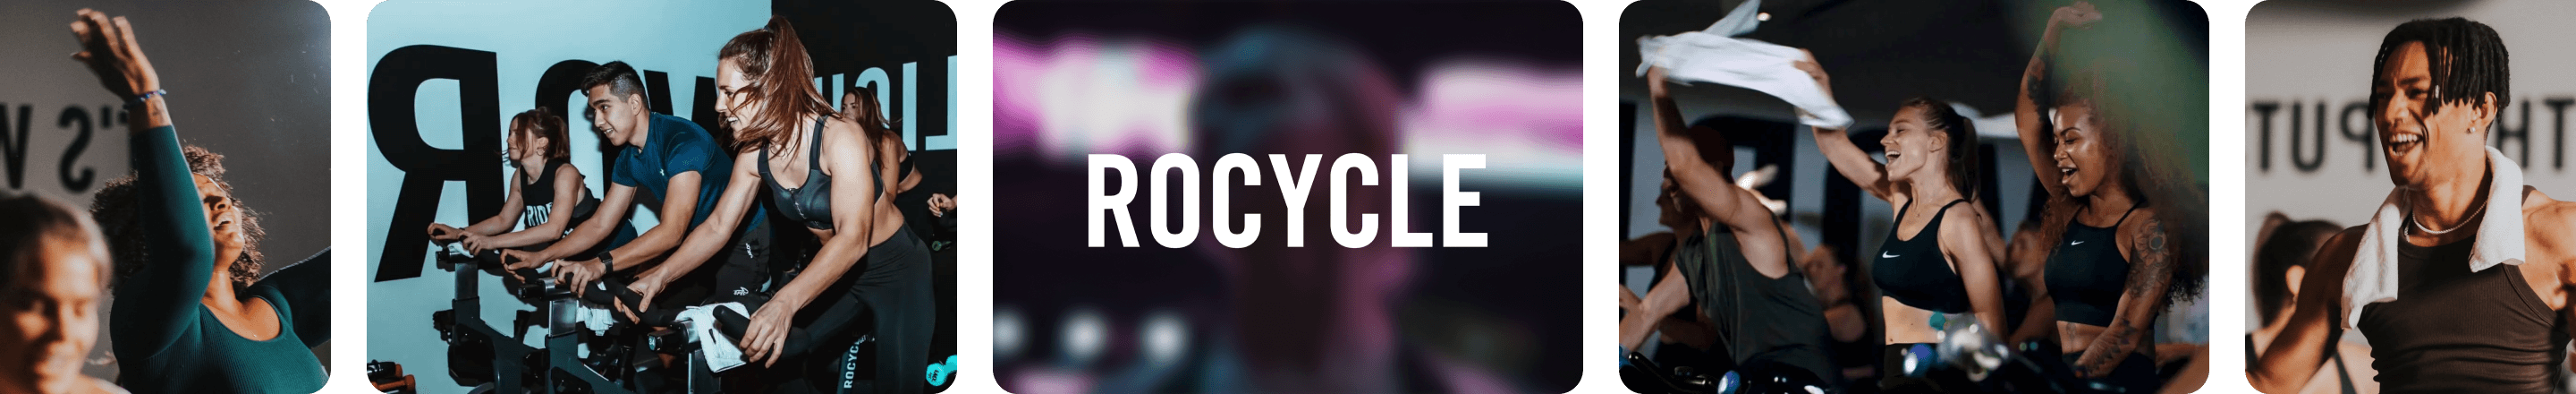 Rocycle-collage